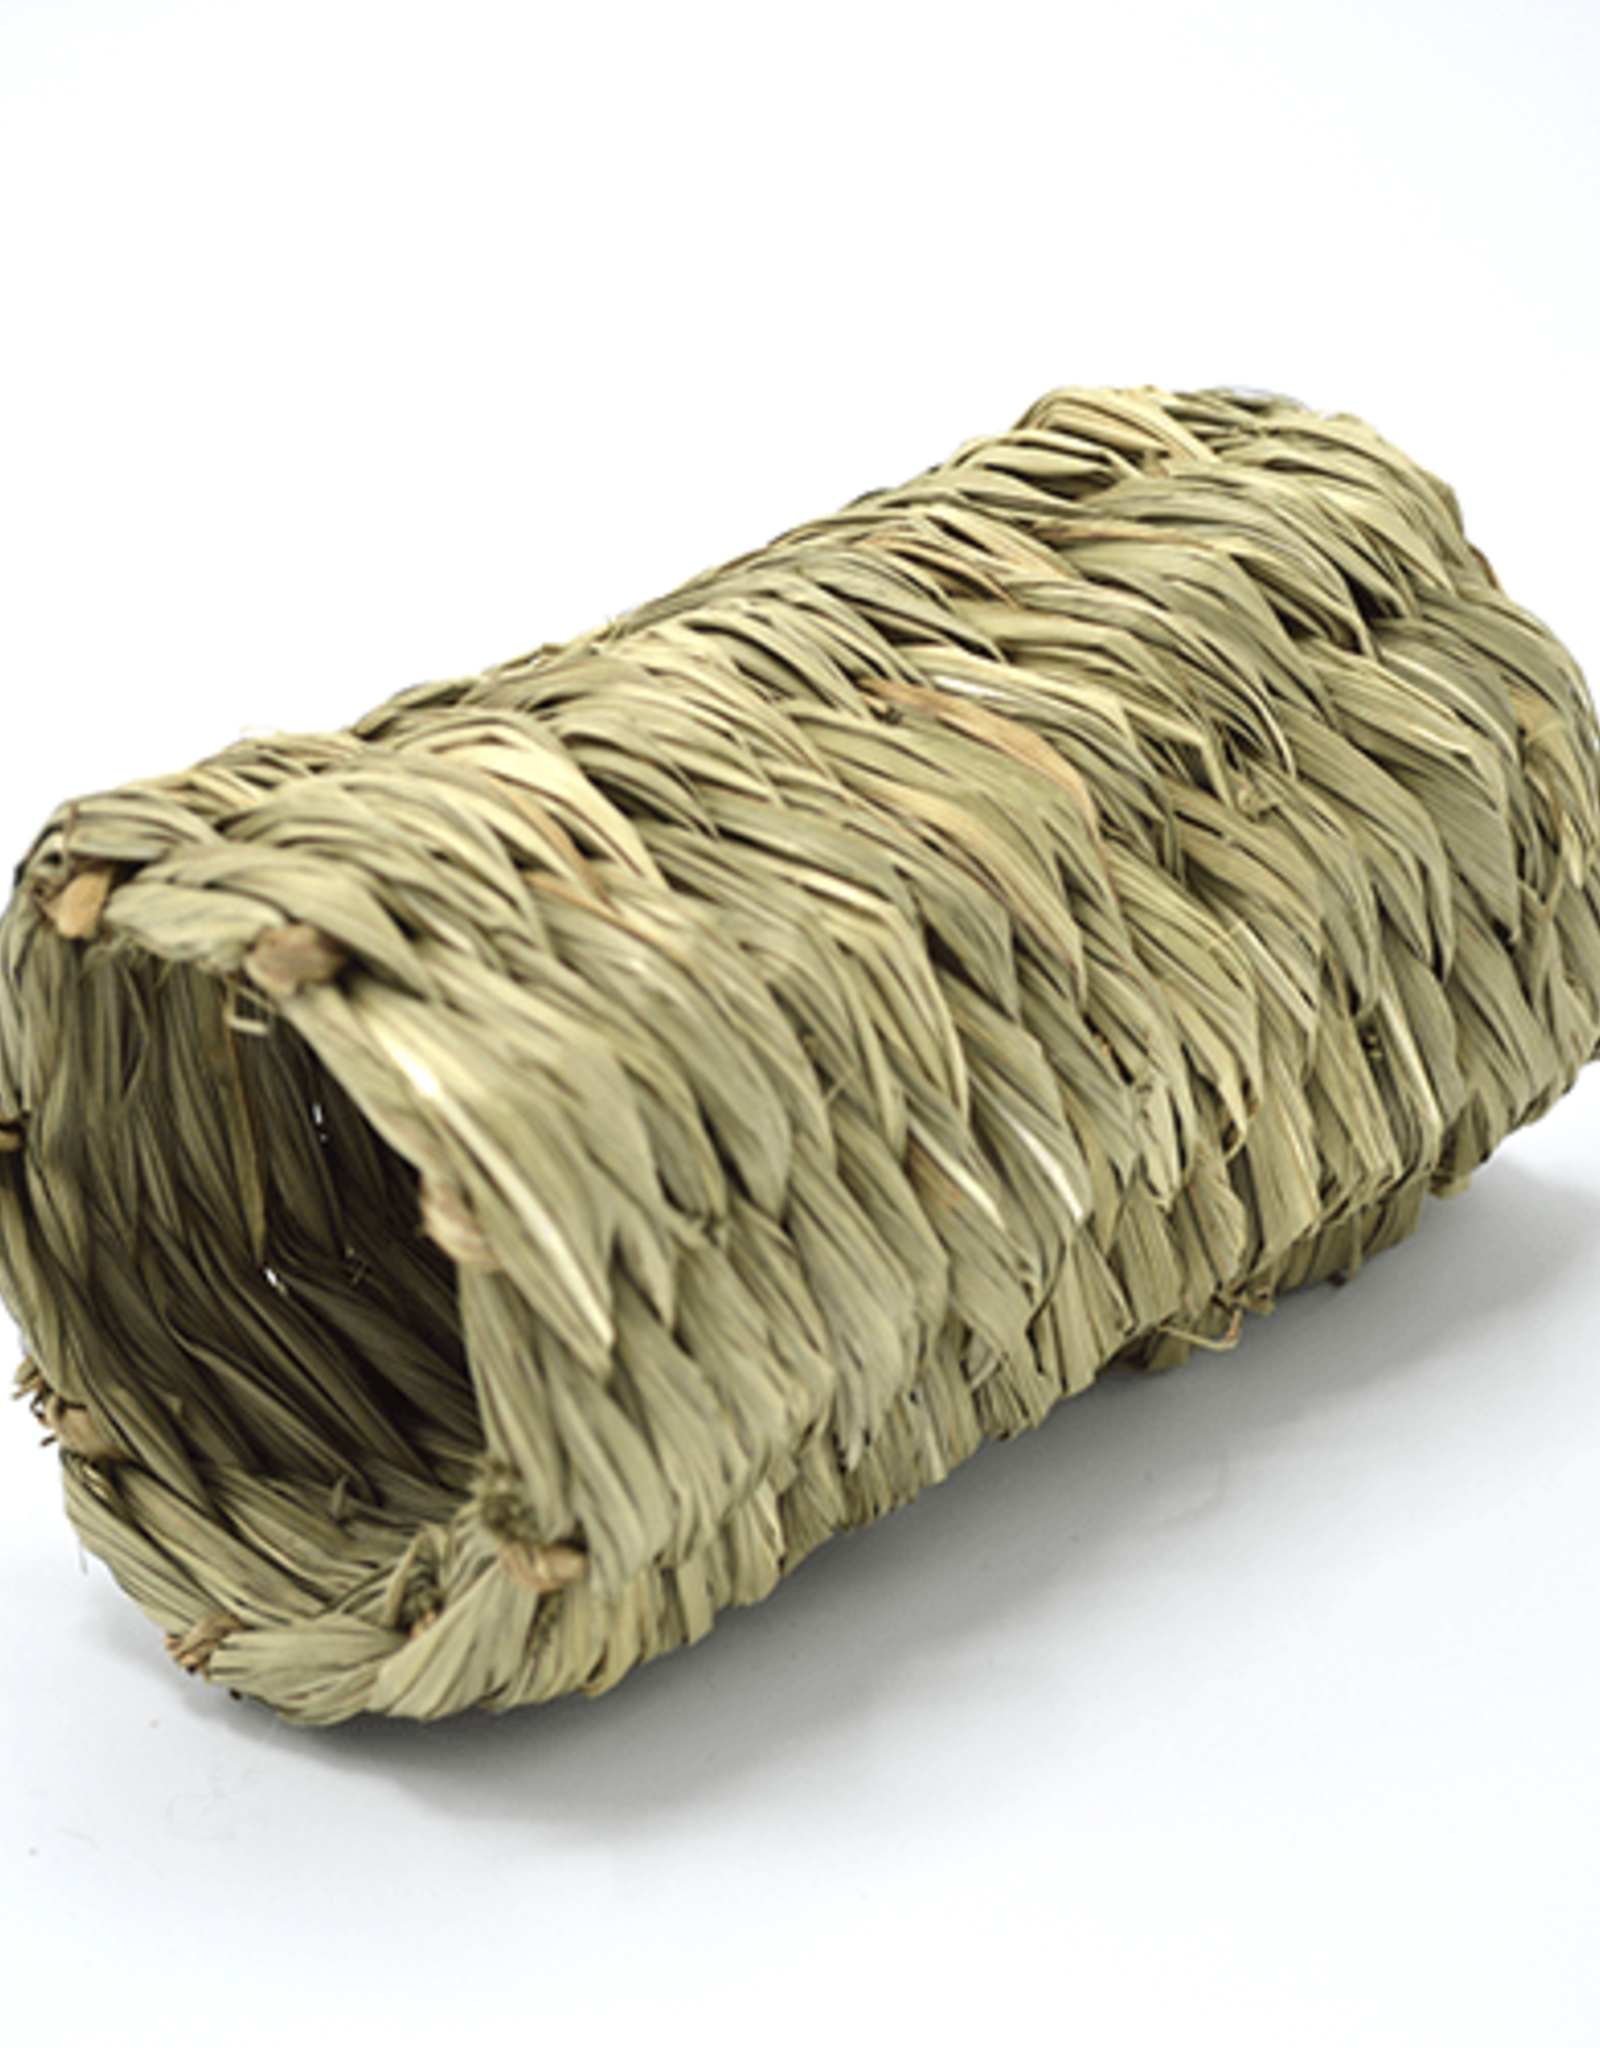 OXBOW PET PRODUCTS OXBOW TIMOTHY HAY BARREL